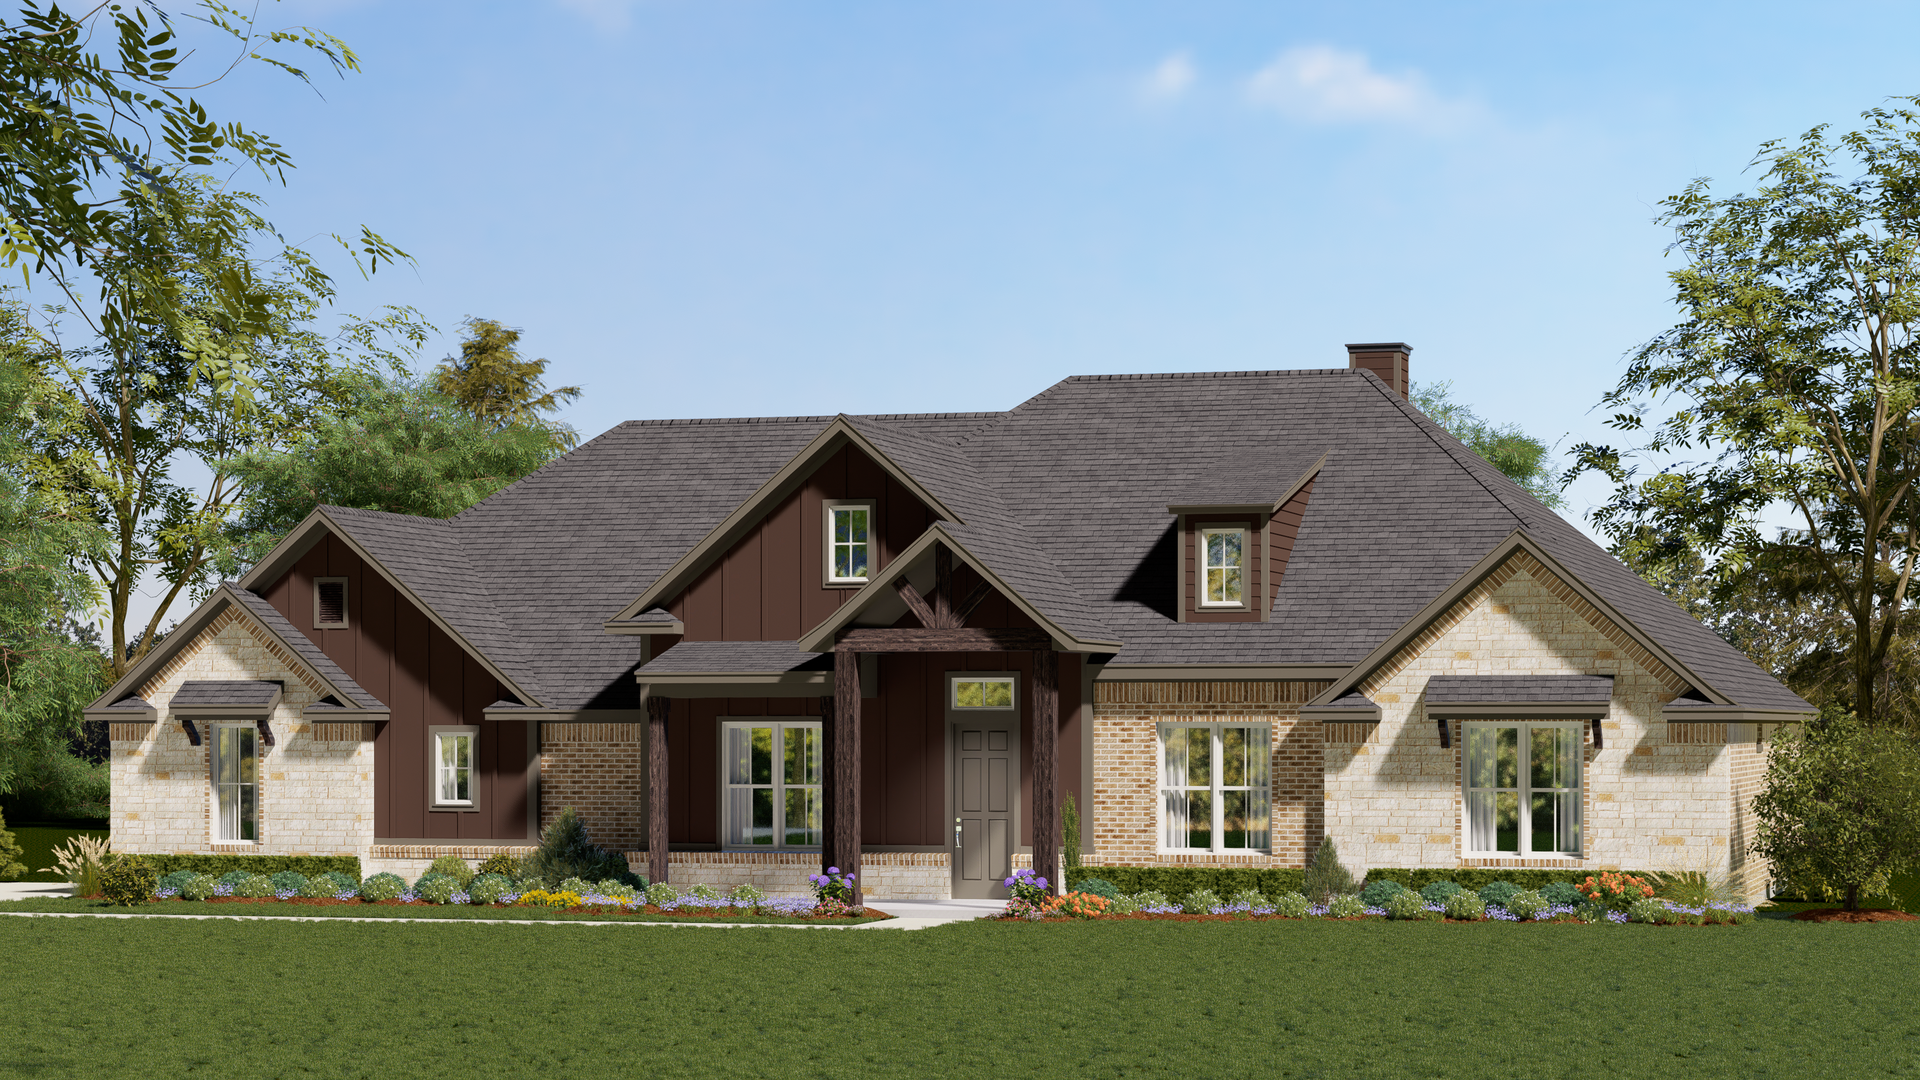 2915 C with Stone. 2,915sf New Home